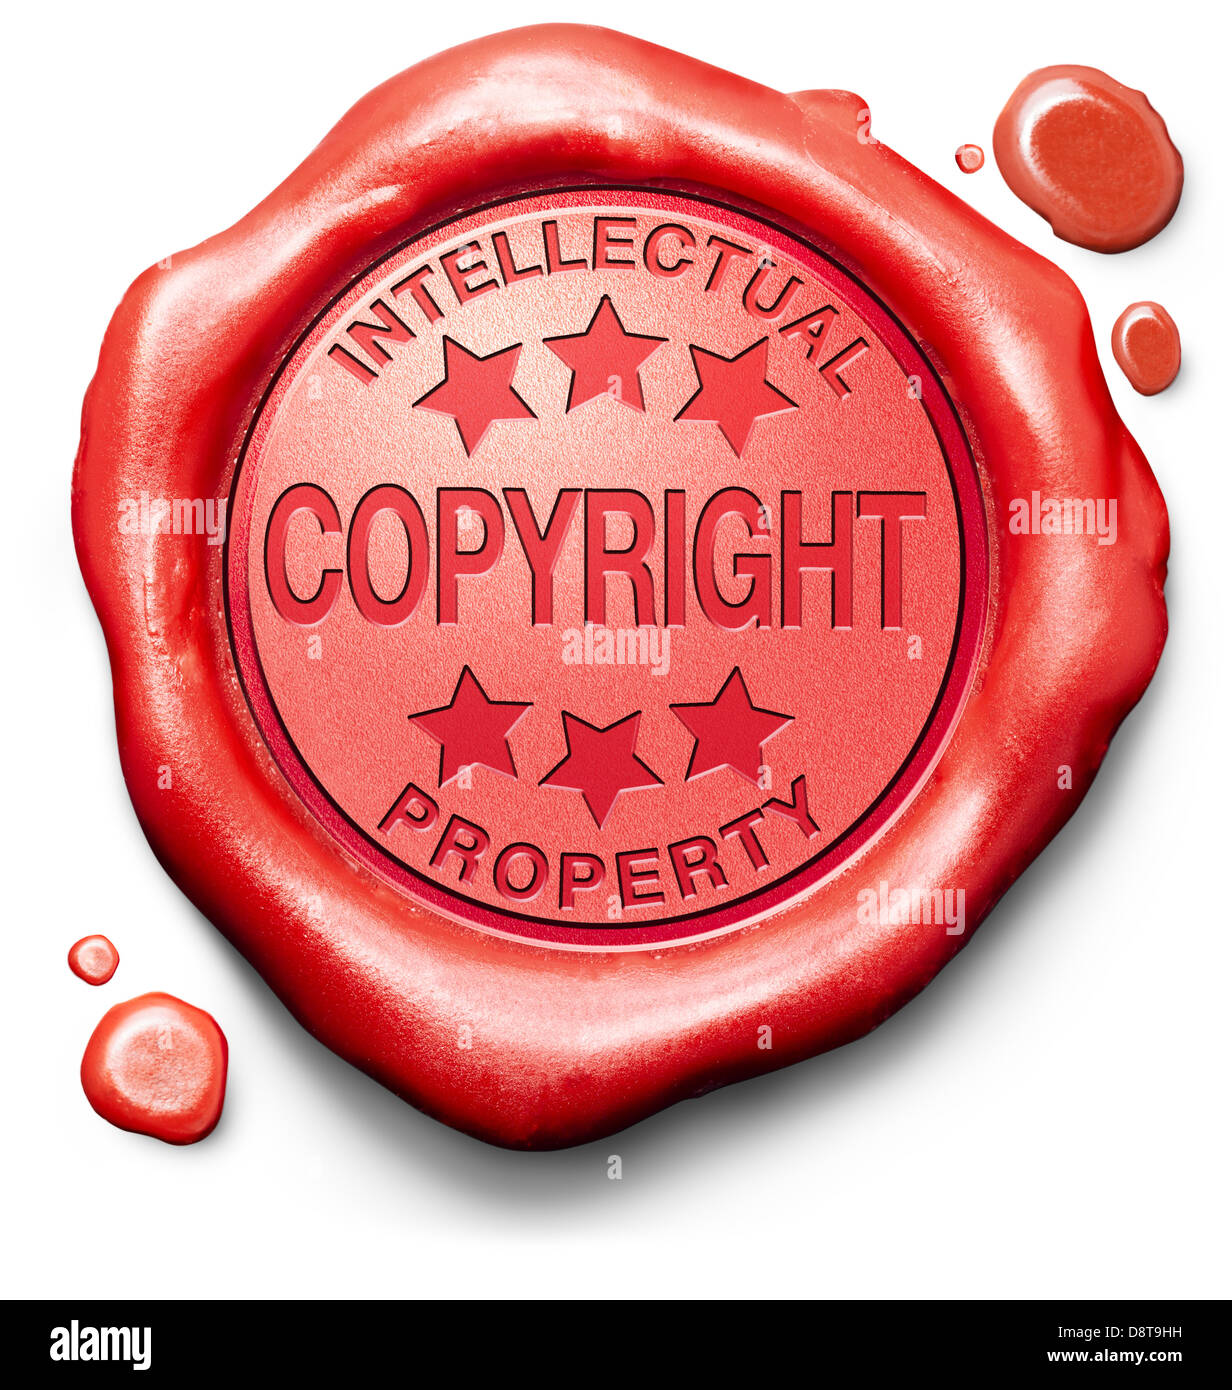 copyright intellectual property law Stock Photo